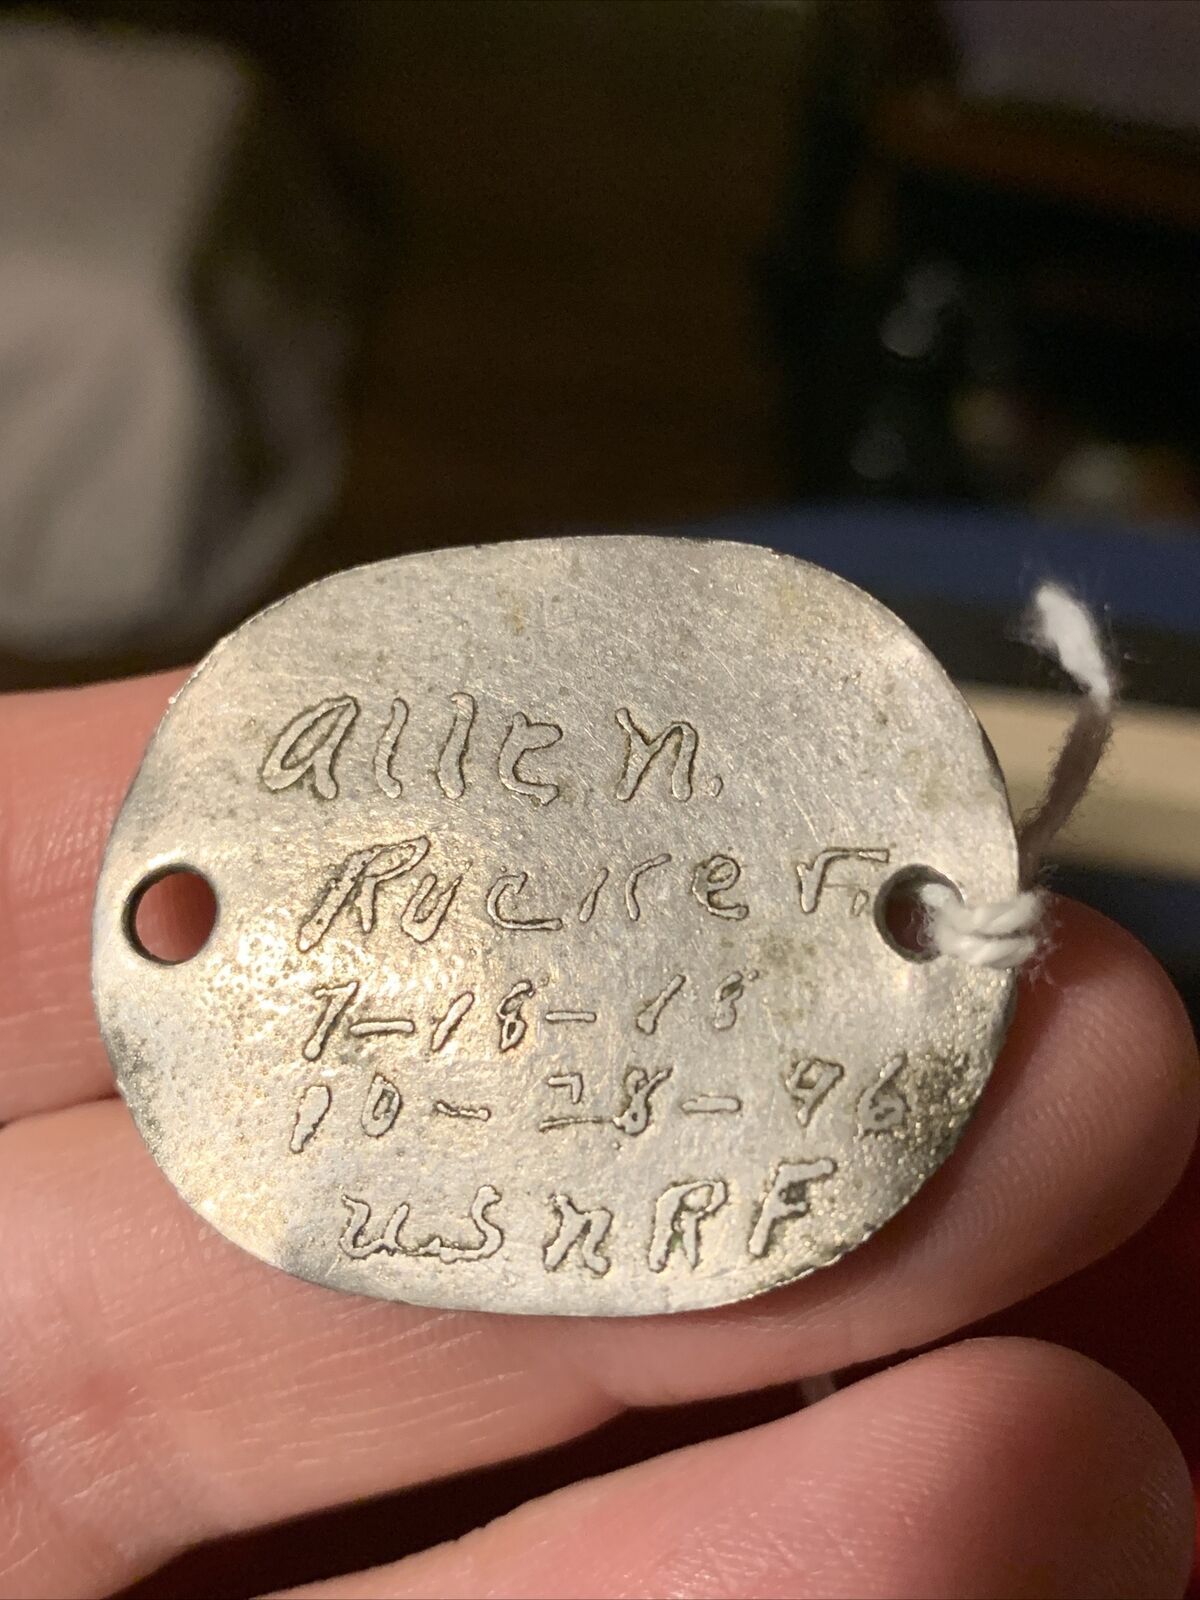 WWI ALLEN RUCKER Dog Tags with Finger Print 1918 Military ID NAVY USNRF